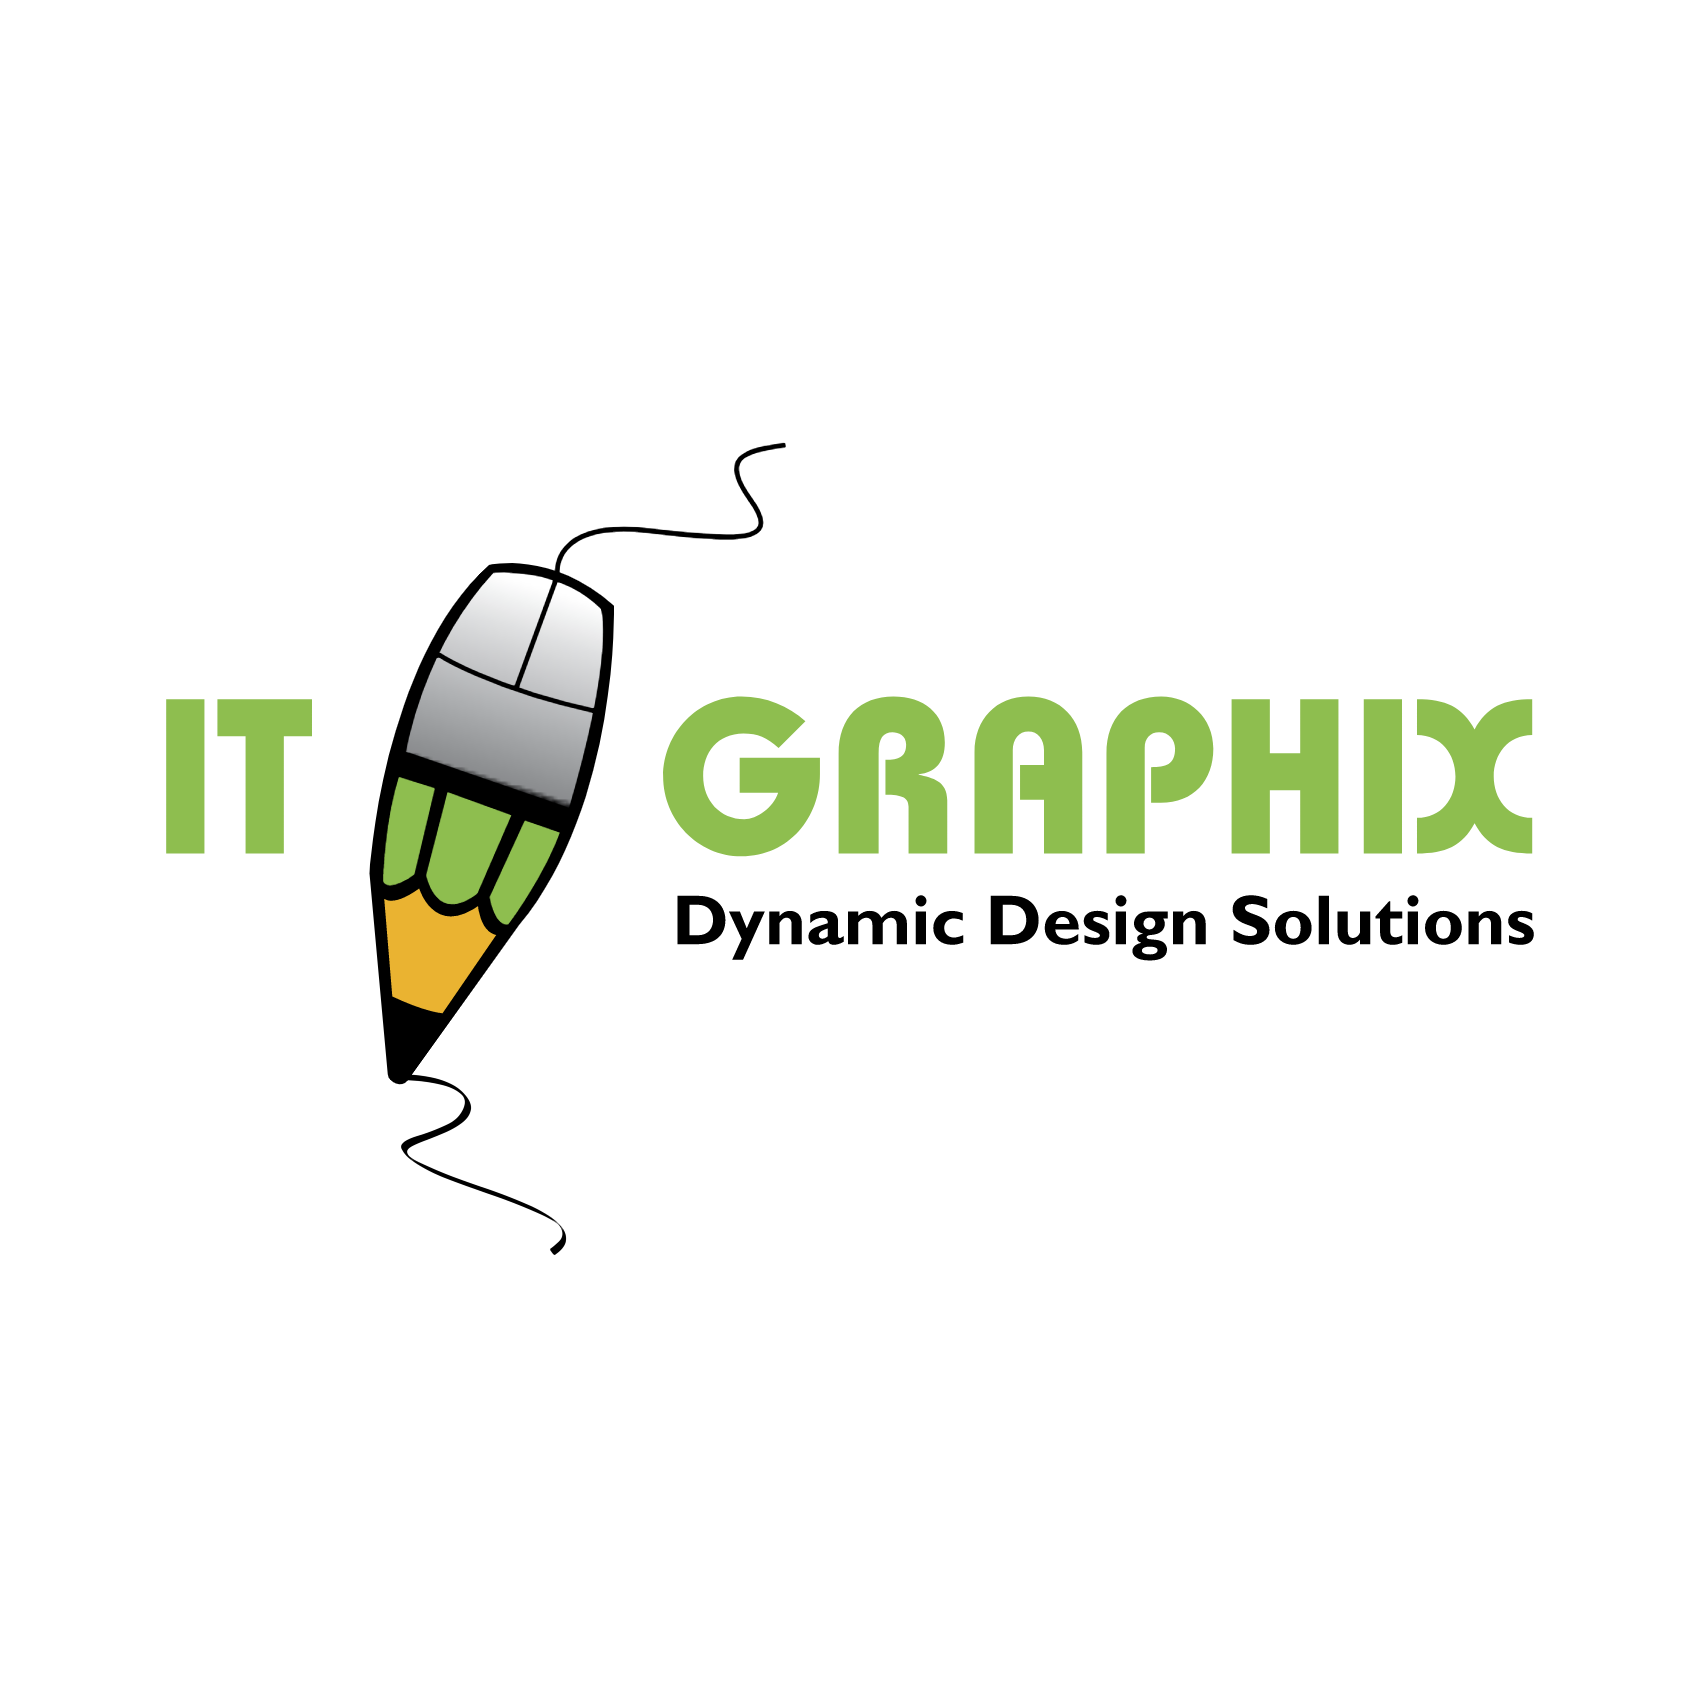 Download IT Graphix Logo PNG and Vector (PDF, SVG, Ai, EPS) Free